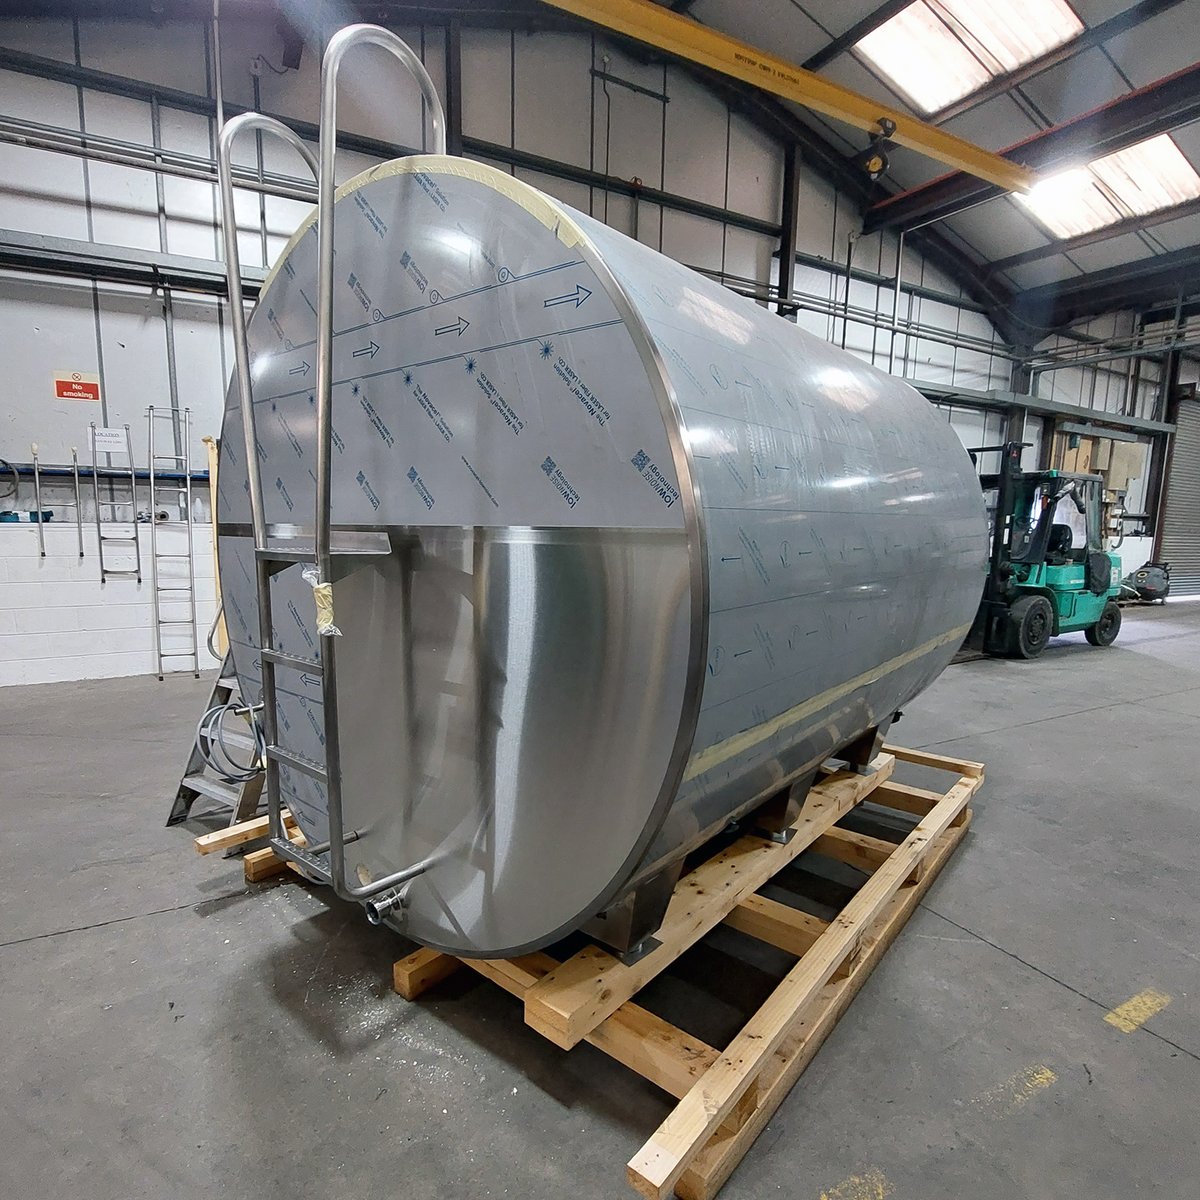 Finishing touches on this dairy tank in dispatch.

We have a wide range of products to assist you in efficient milk production 

Get in contact for more 

#manufacturemonday #stainlesssteel #fabdec #DARIKOOL #teamdairy #farmsupplies #dairyfarming #milking #ukmanufacturing #ukmfg